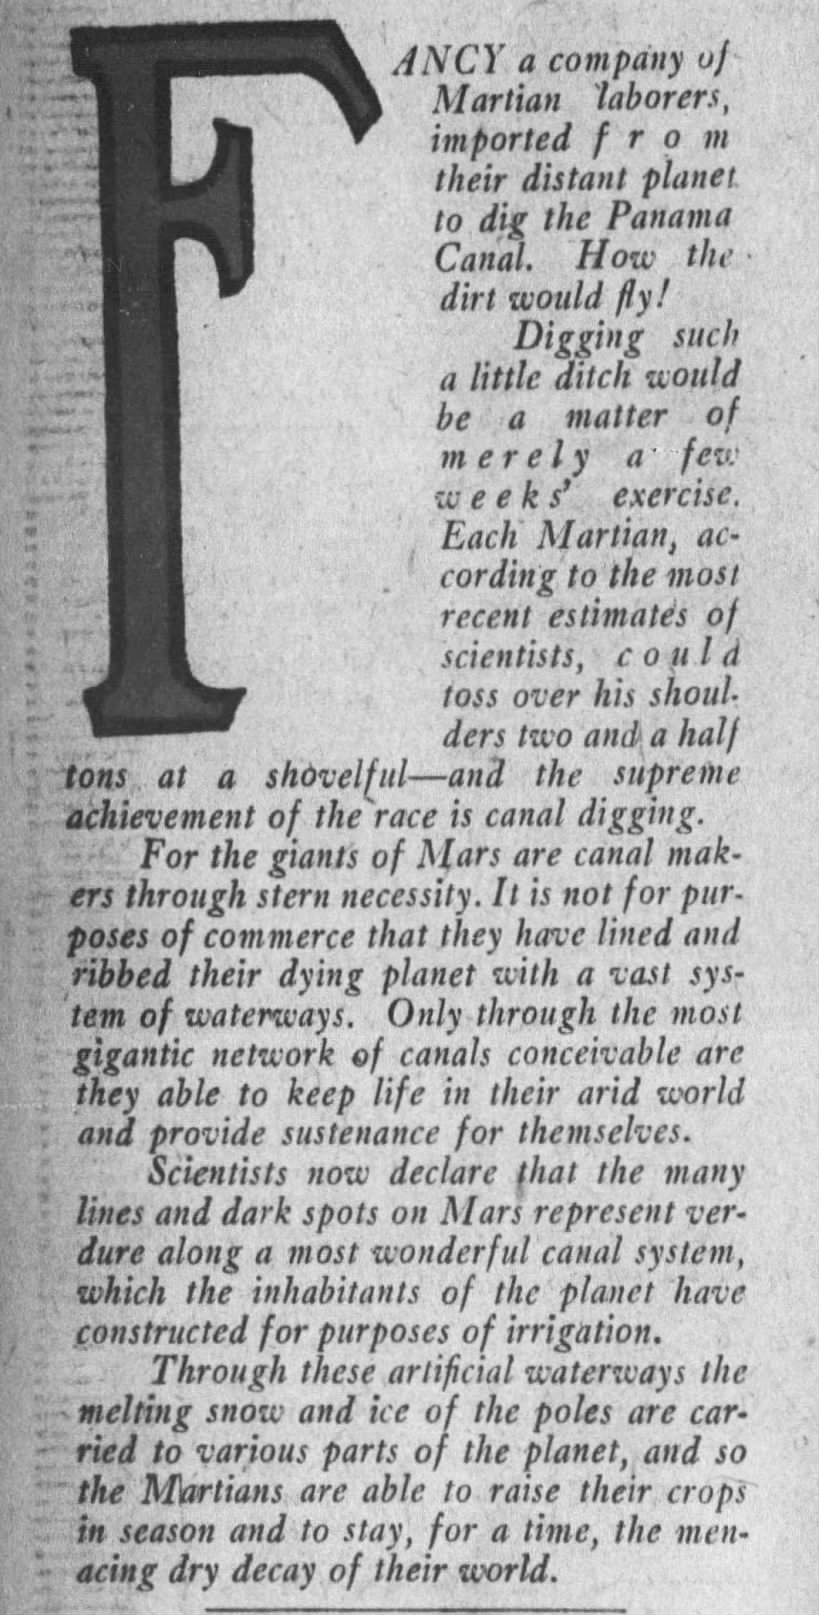 Excerpt from Los Angeles Times feature on Mars canals, 1907